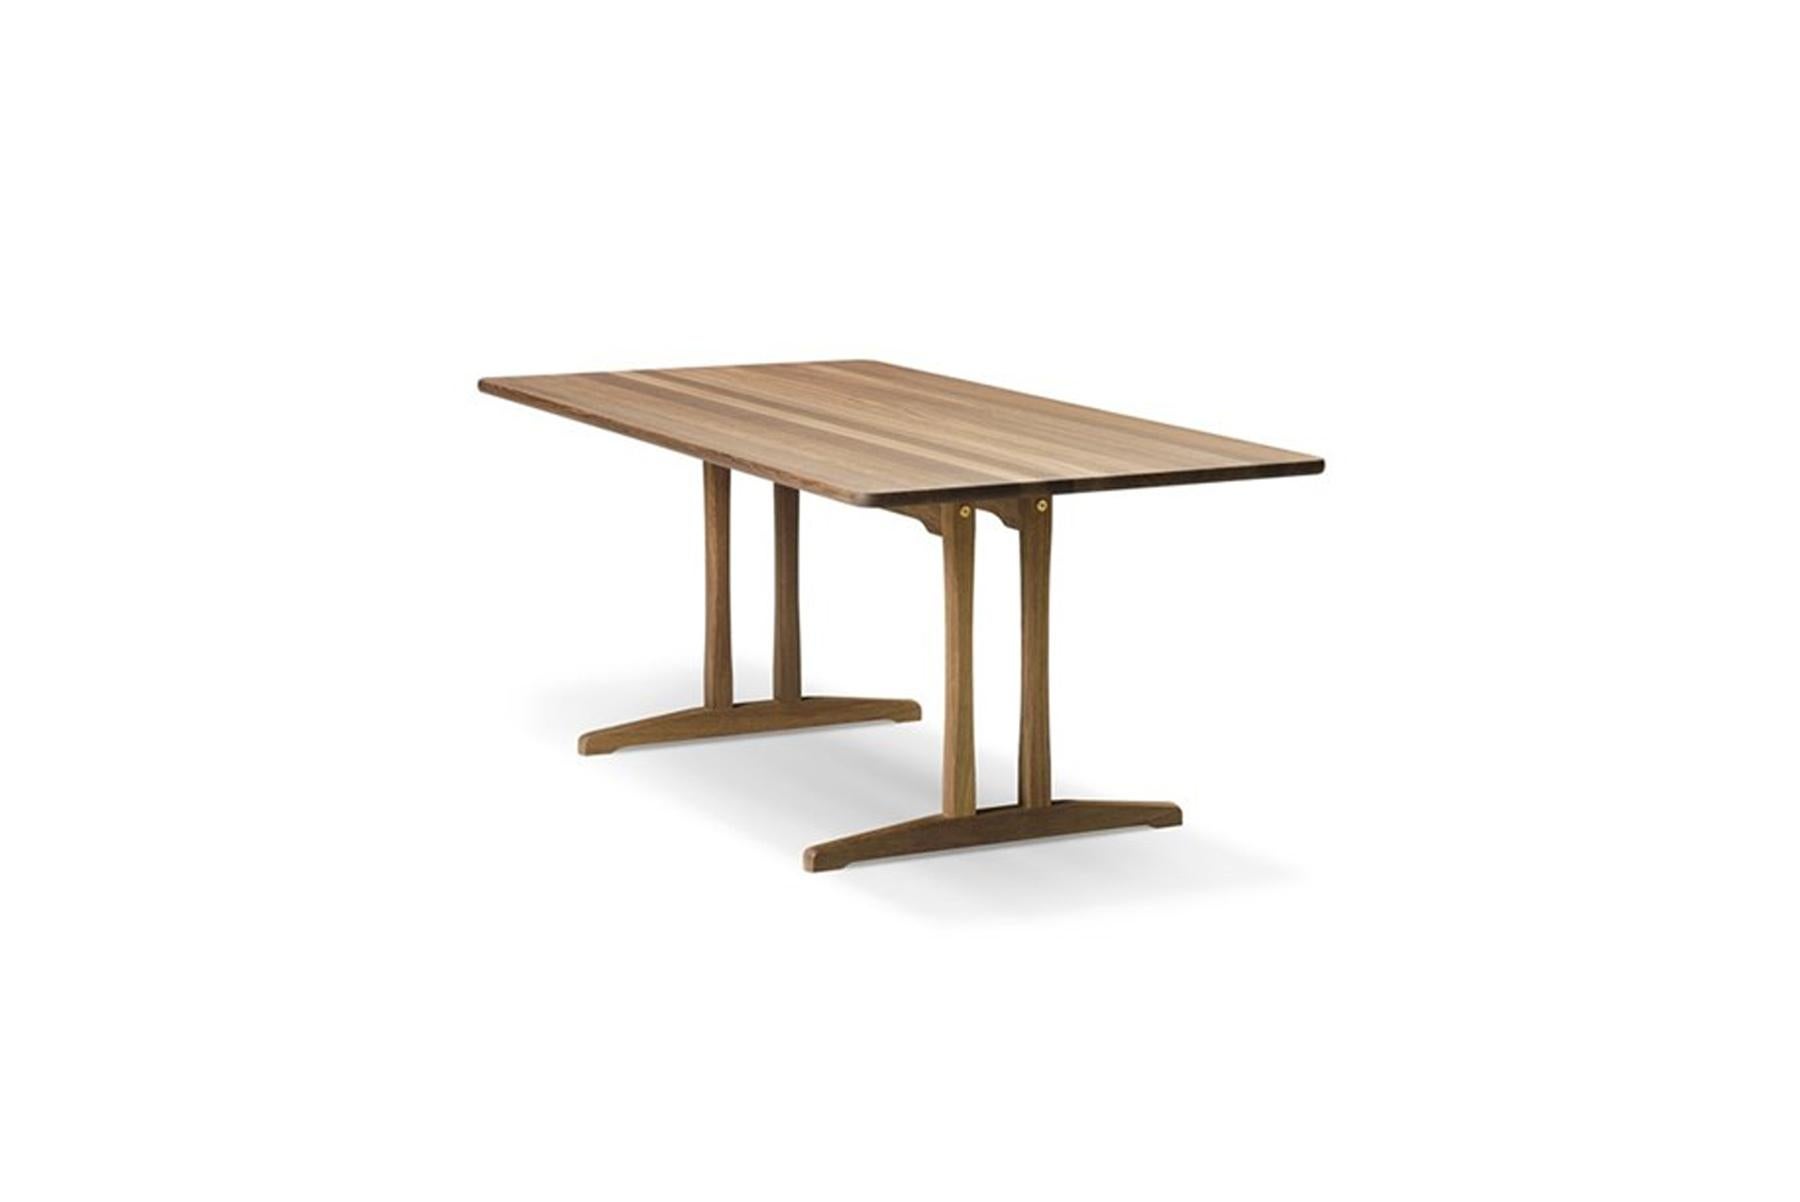 Børge Mogensen 6293 C18 dining table Inspired by traditional Shaker tables, Mogensen designed C18 in 1947 as a durable table for everyday use. Available with additional plates extending the table top by 40 cm at each end.